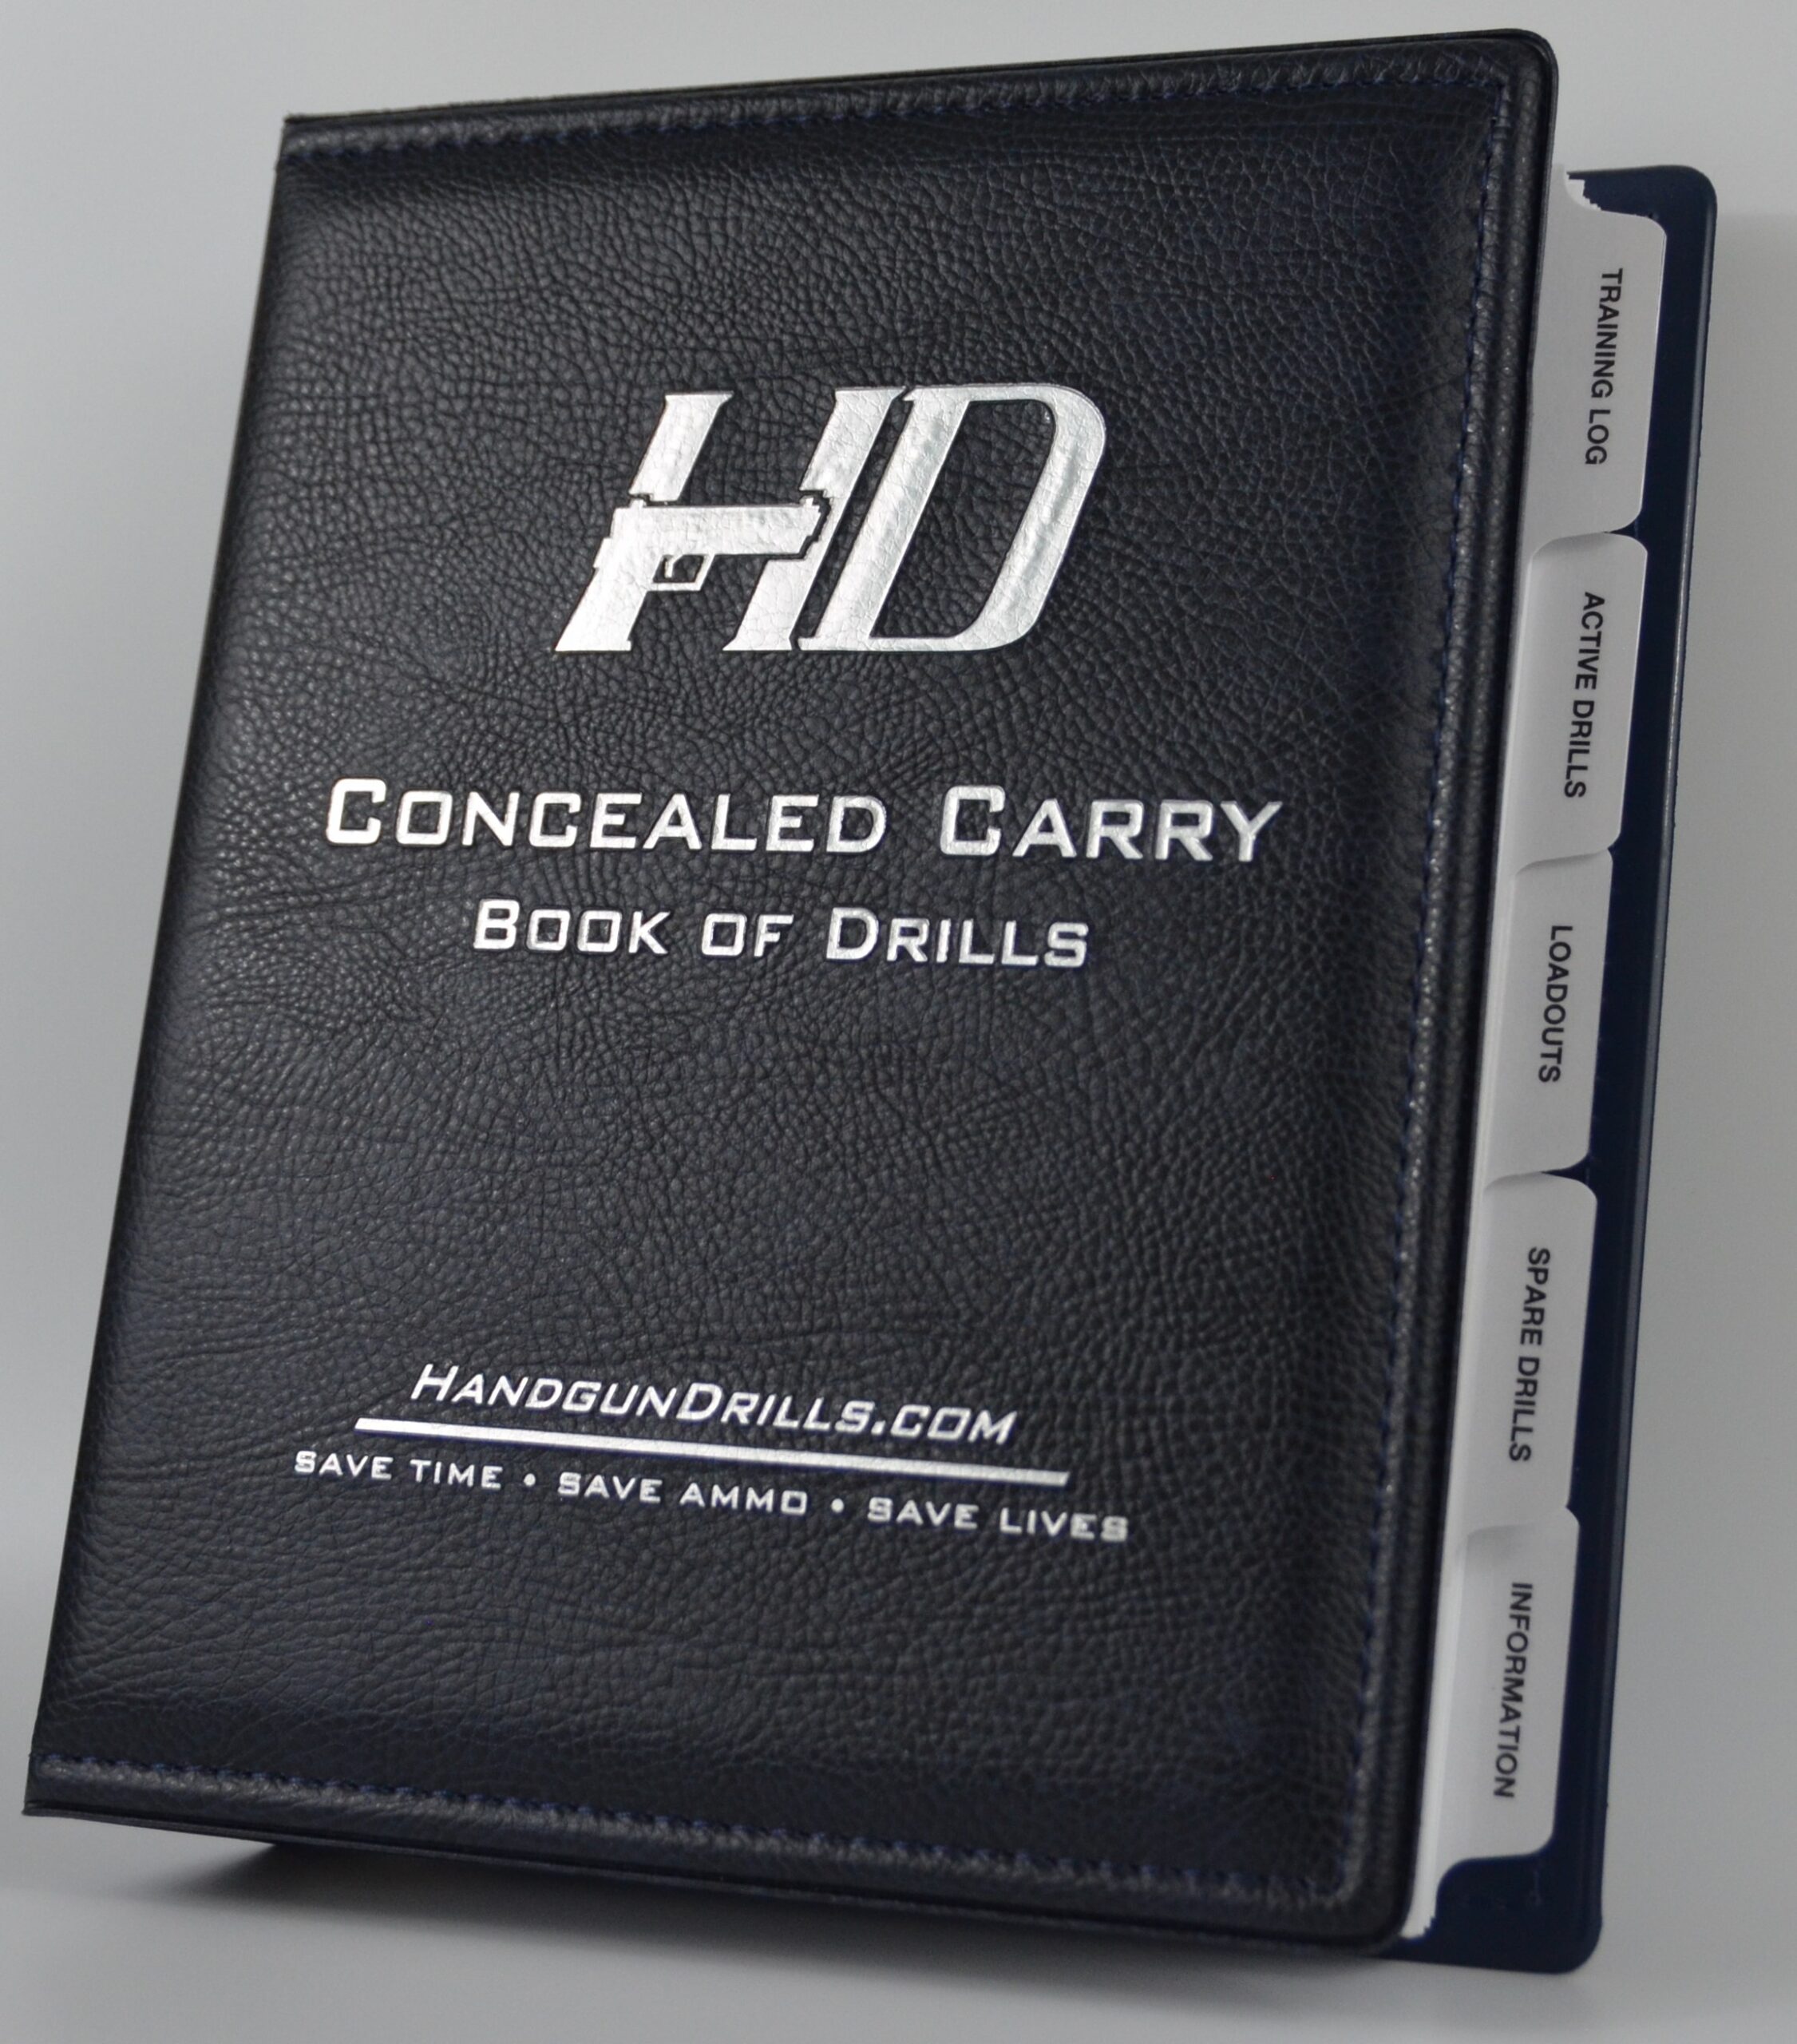 NEW First Edition Concealed Carry Book of Drills (with the first